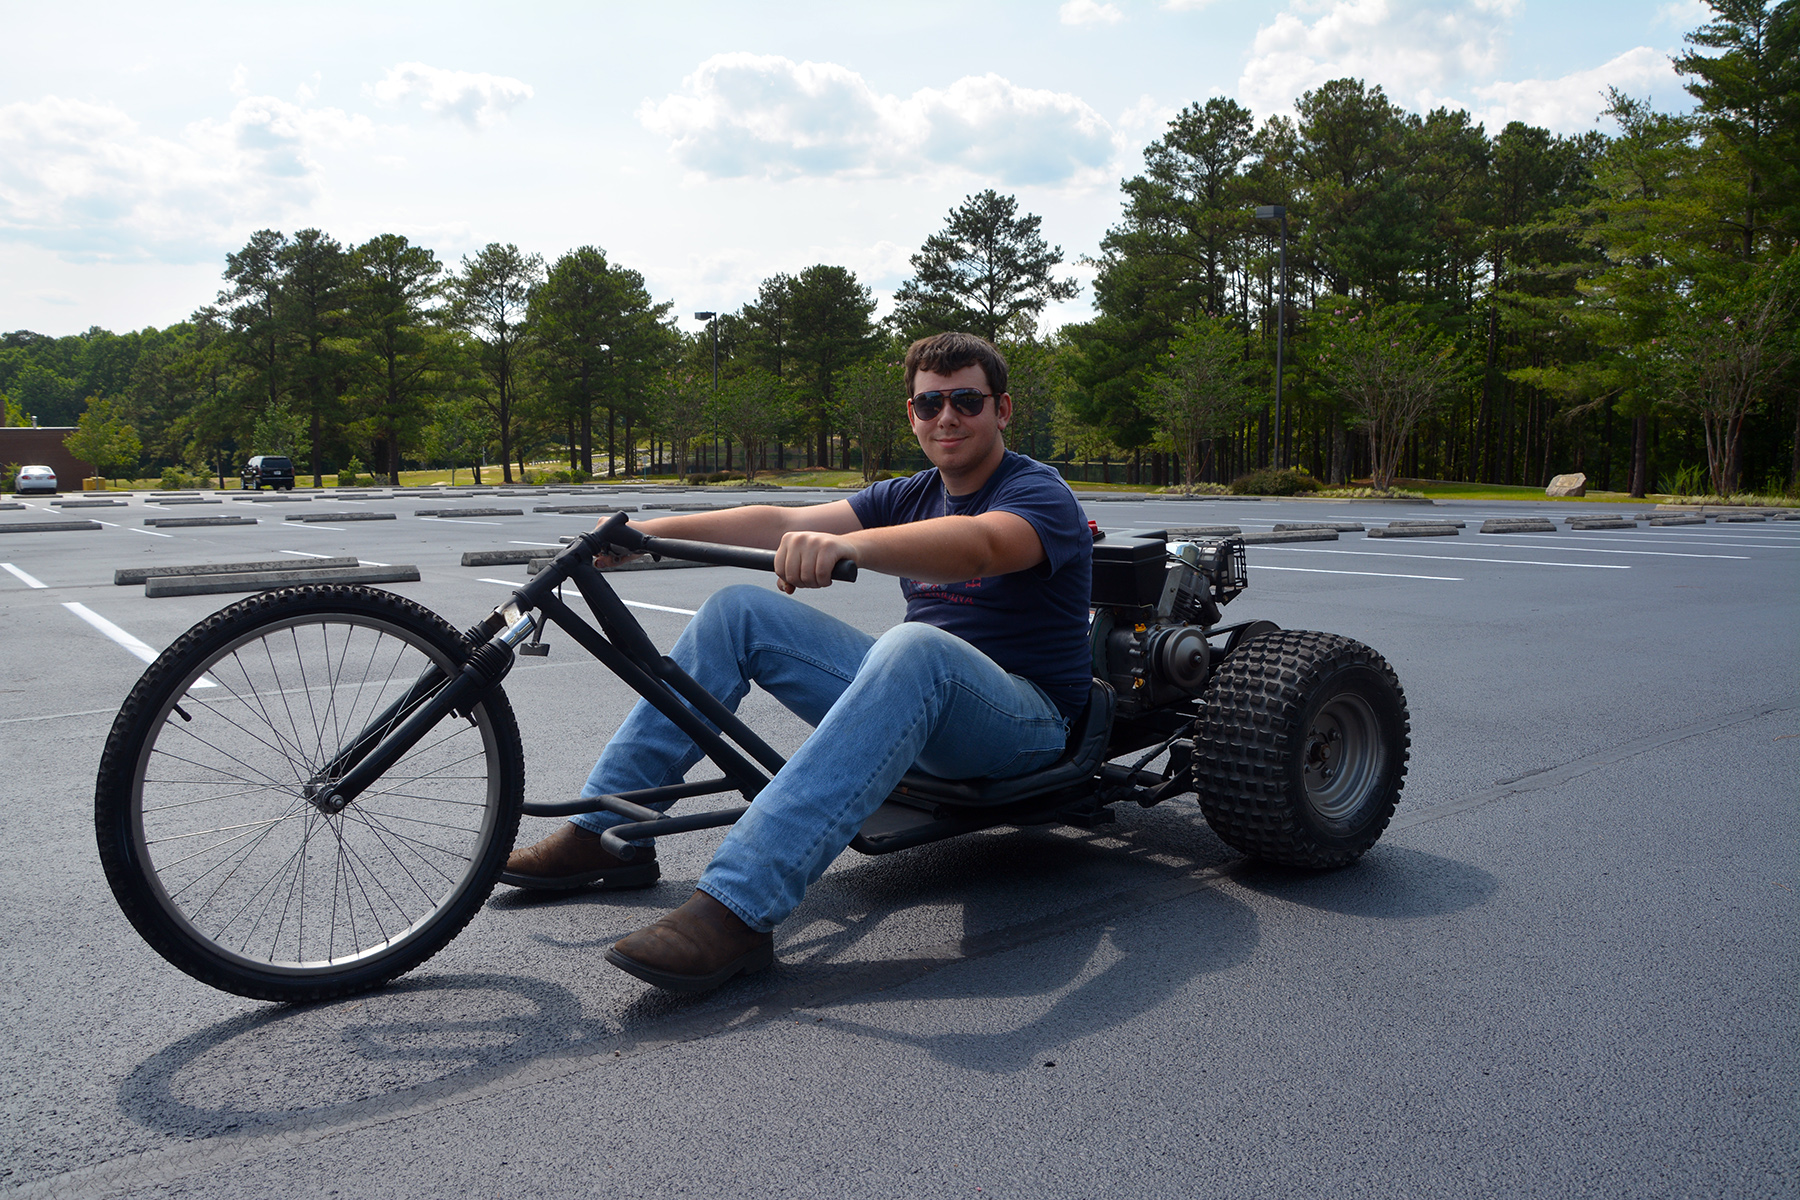 Richmond Community College student Travis Butler sits on the trike that he and his classmate, Jason Felts, built in their welding class. They built the motorized trike using bicycle, lawn mower, go-cart and other scrap parts.